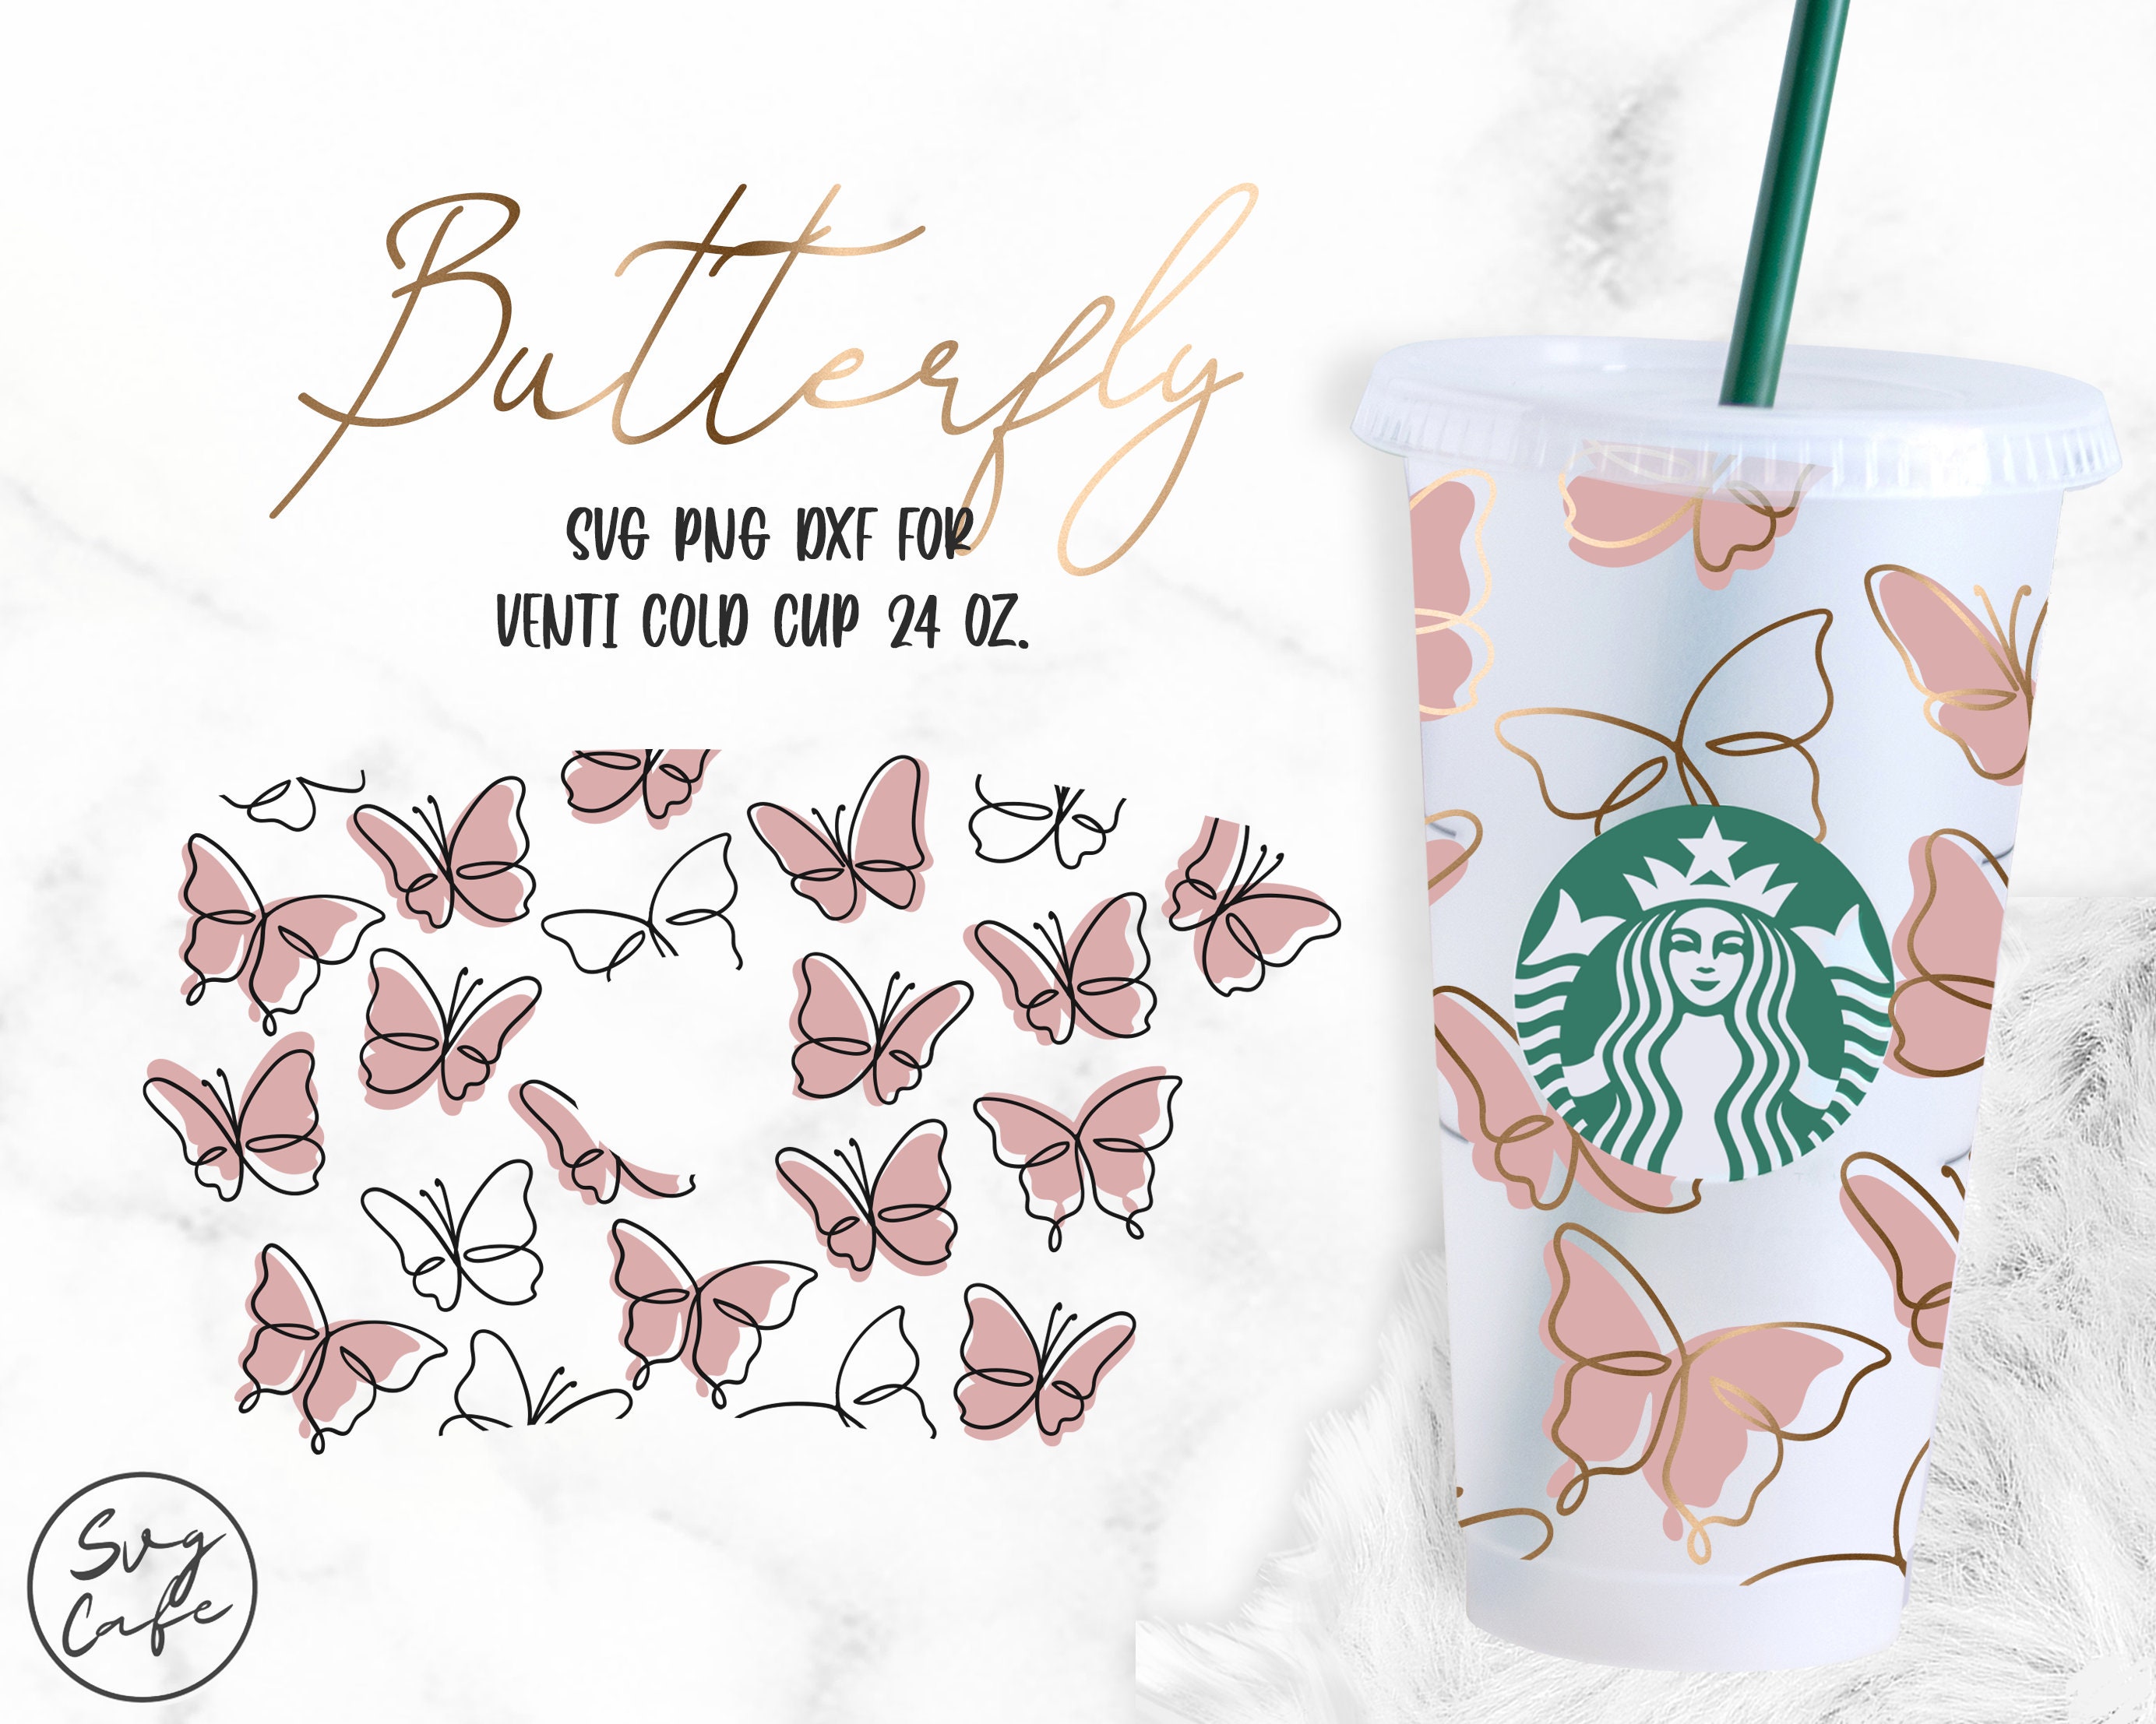 Starbucks Summer Cold Cup Reflective Butterflies LV Print,  in 2020, Personalized starbucks